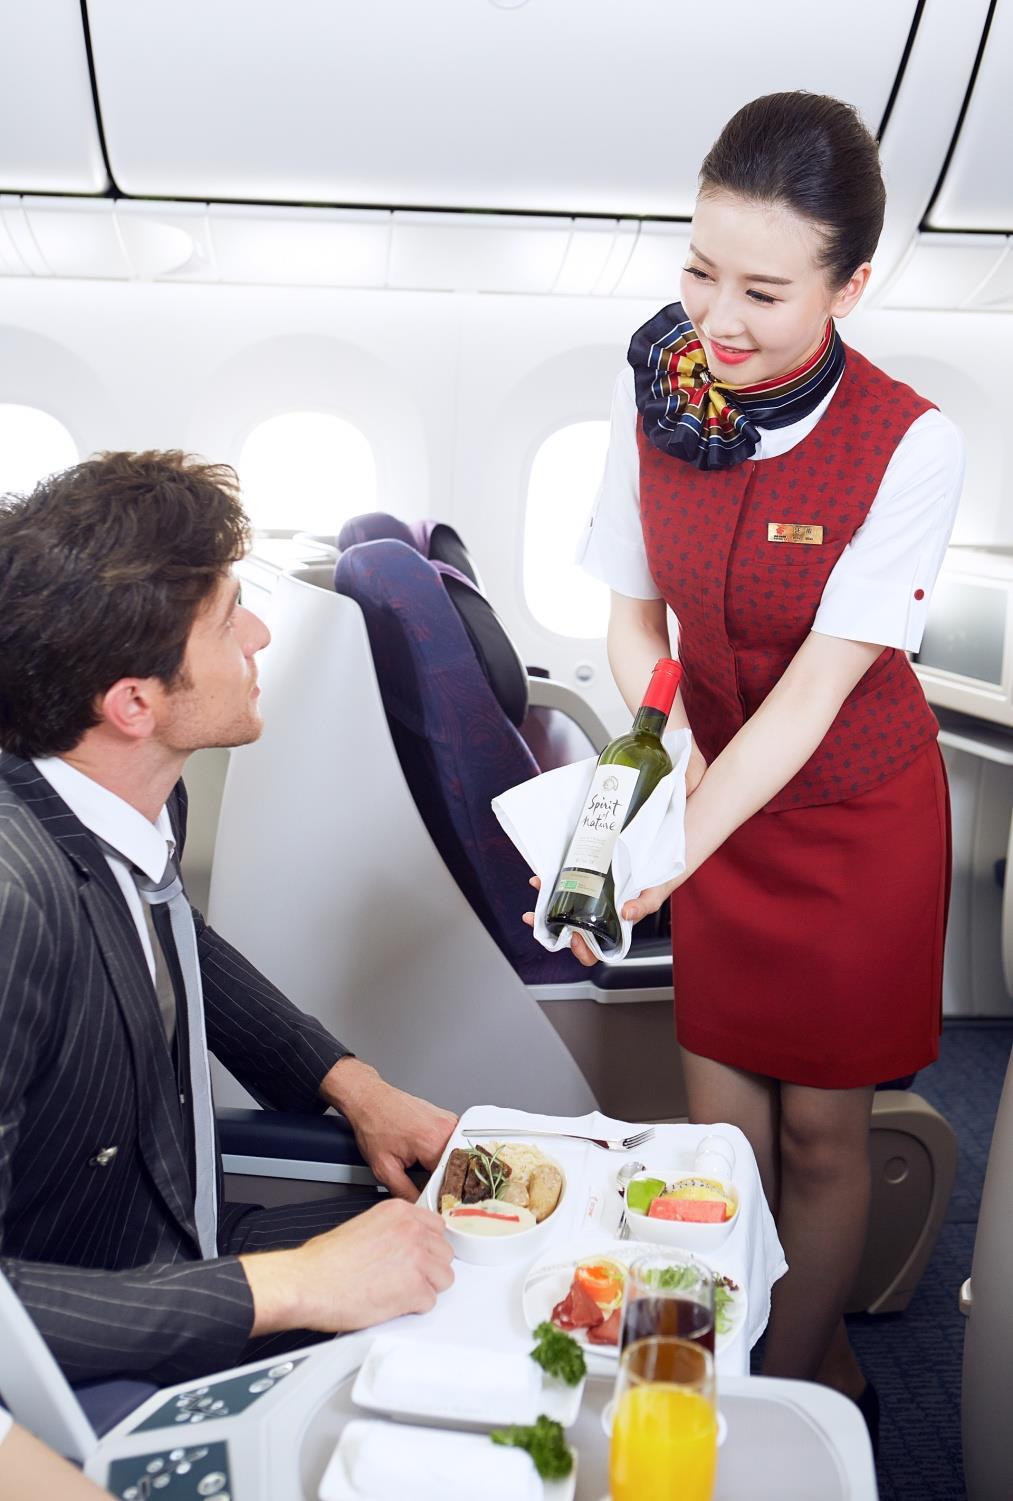 A Passenger Base that is Most Valuable RMB 100 Million